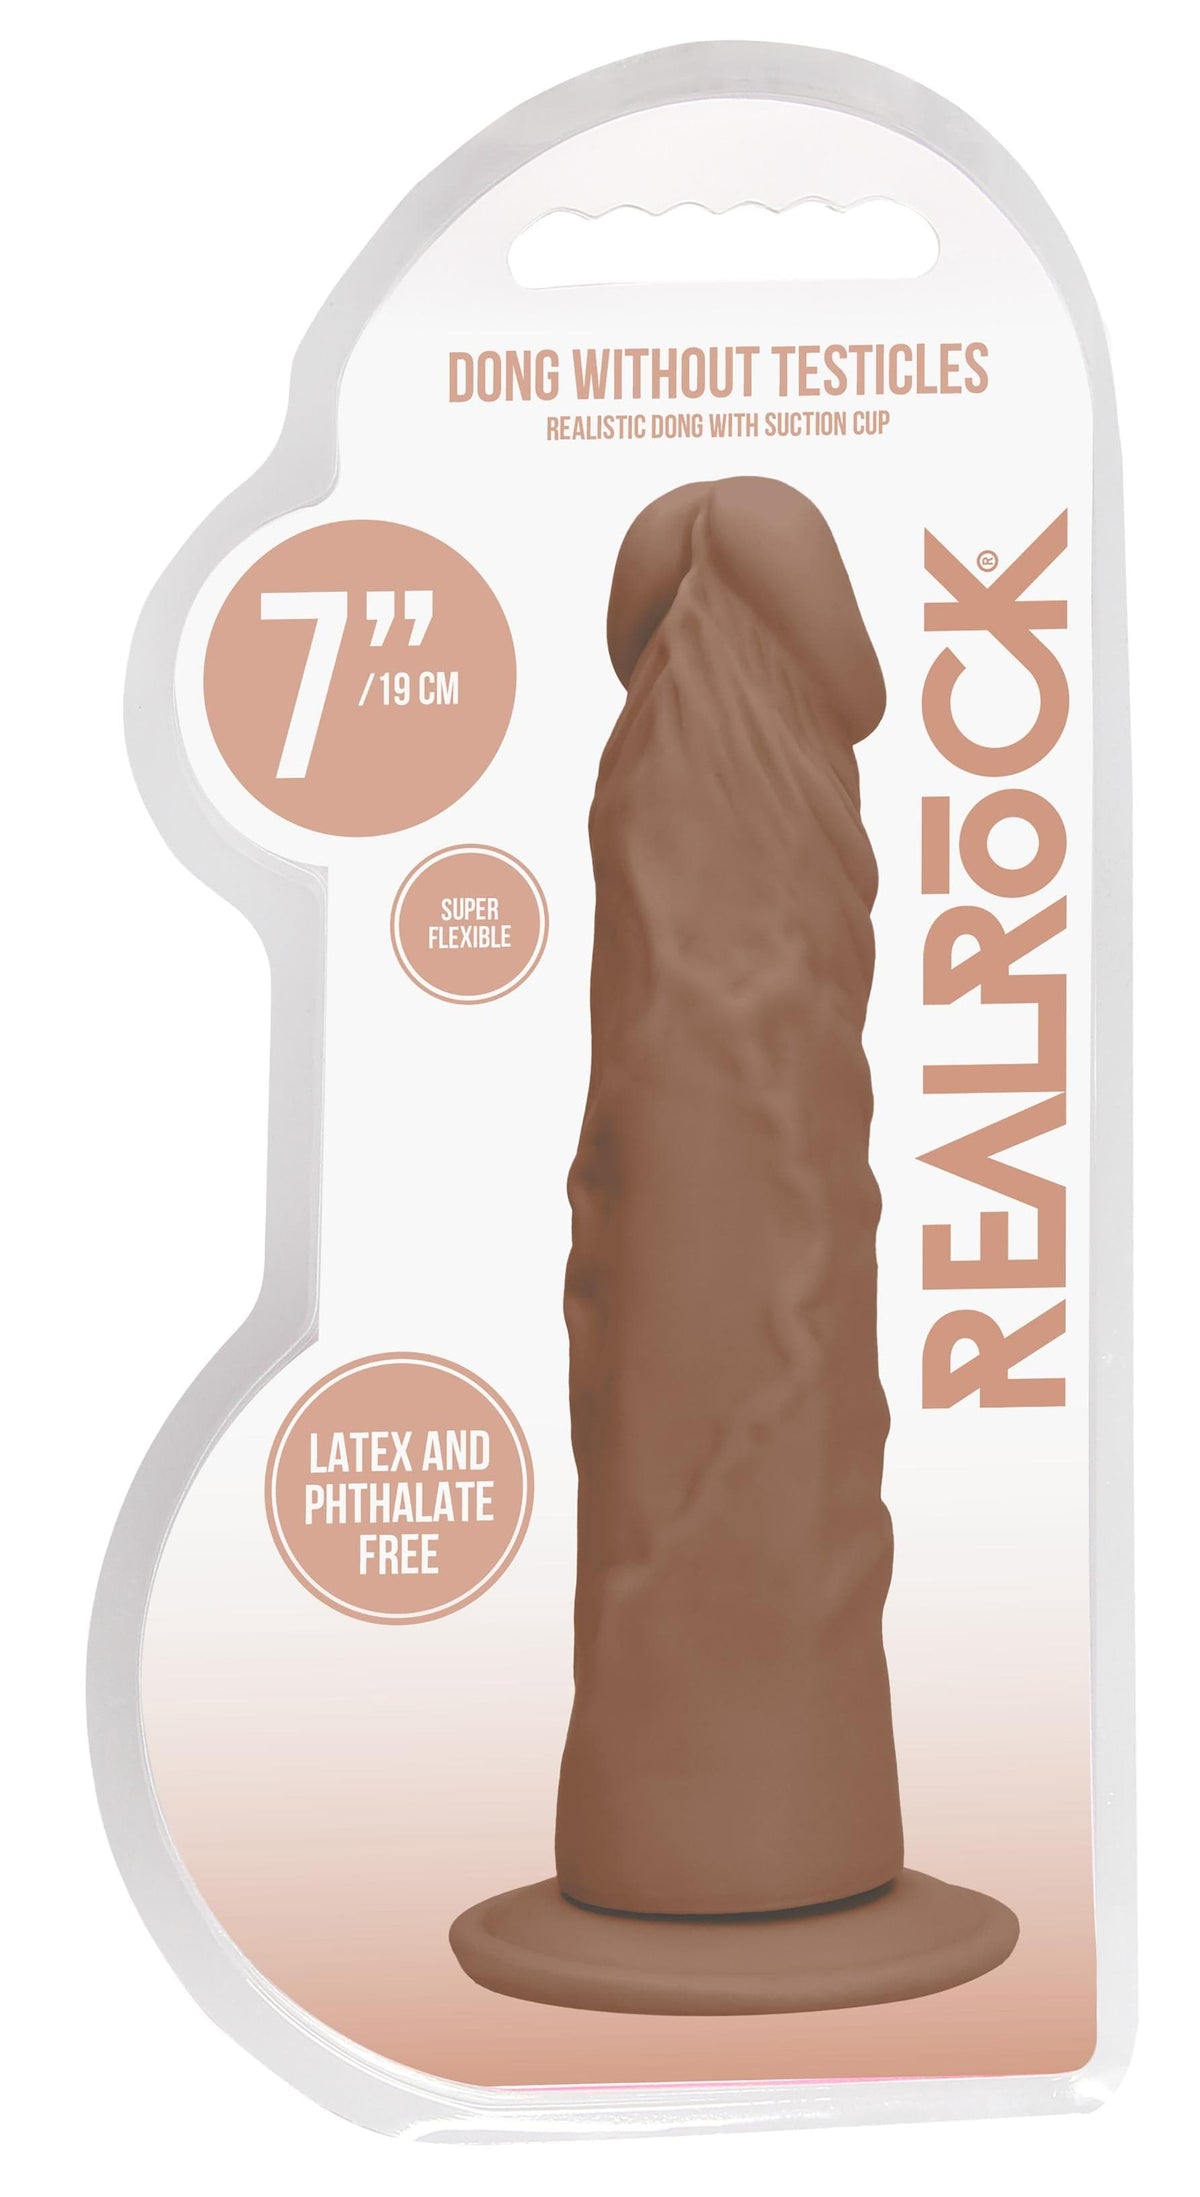 7 inch dong without testicles tan